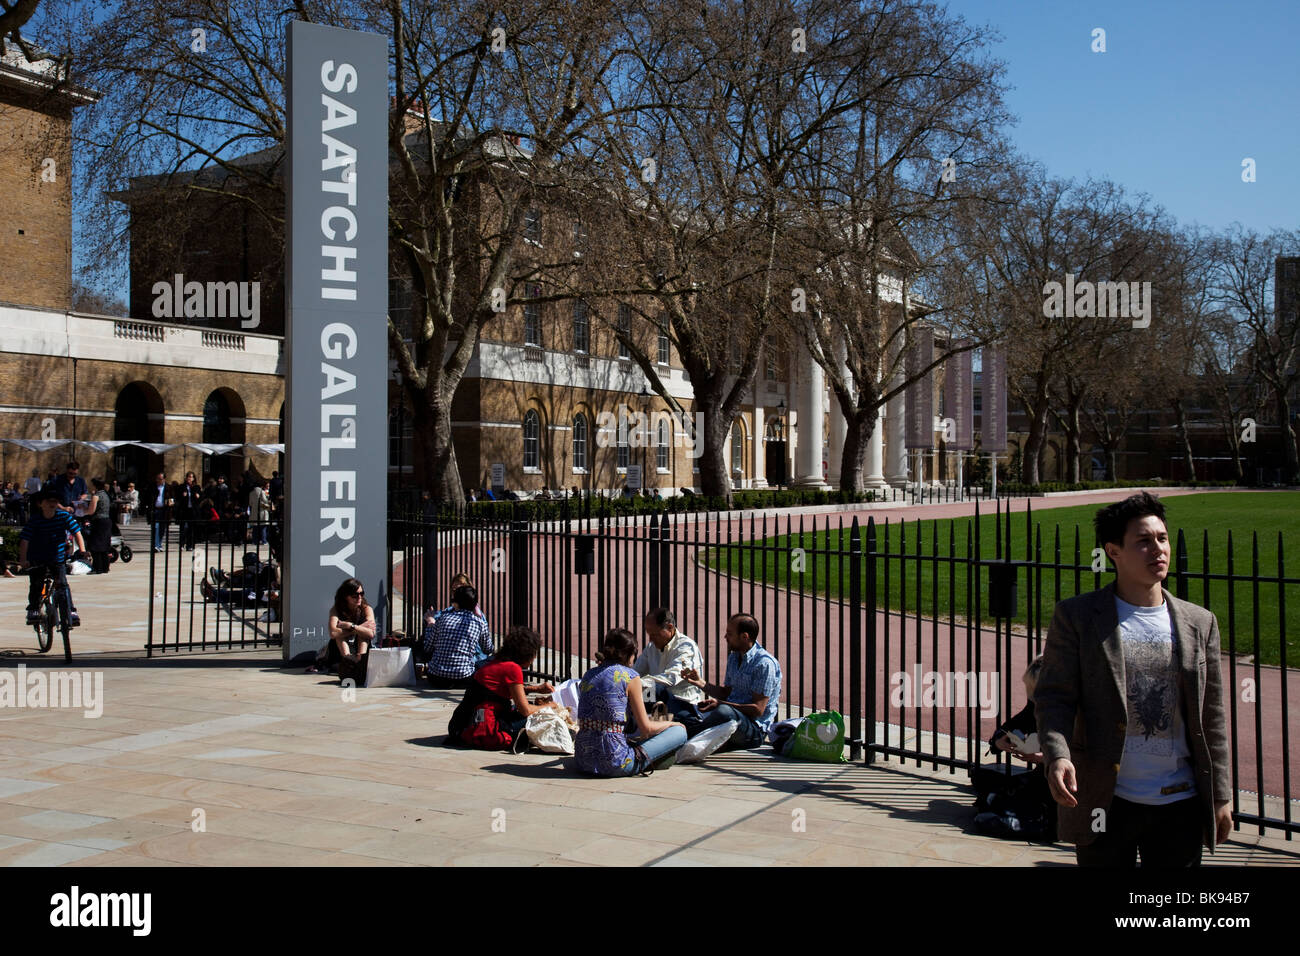 Entrance to the Saatchi Gallery, Chelsea. One of the largest and most respected galleries in London. Stock Photo